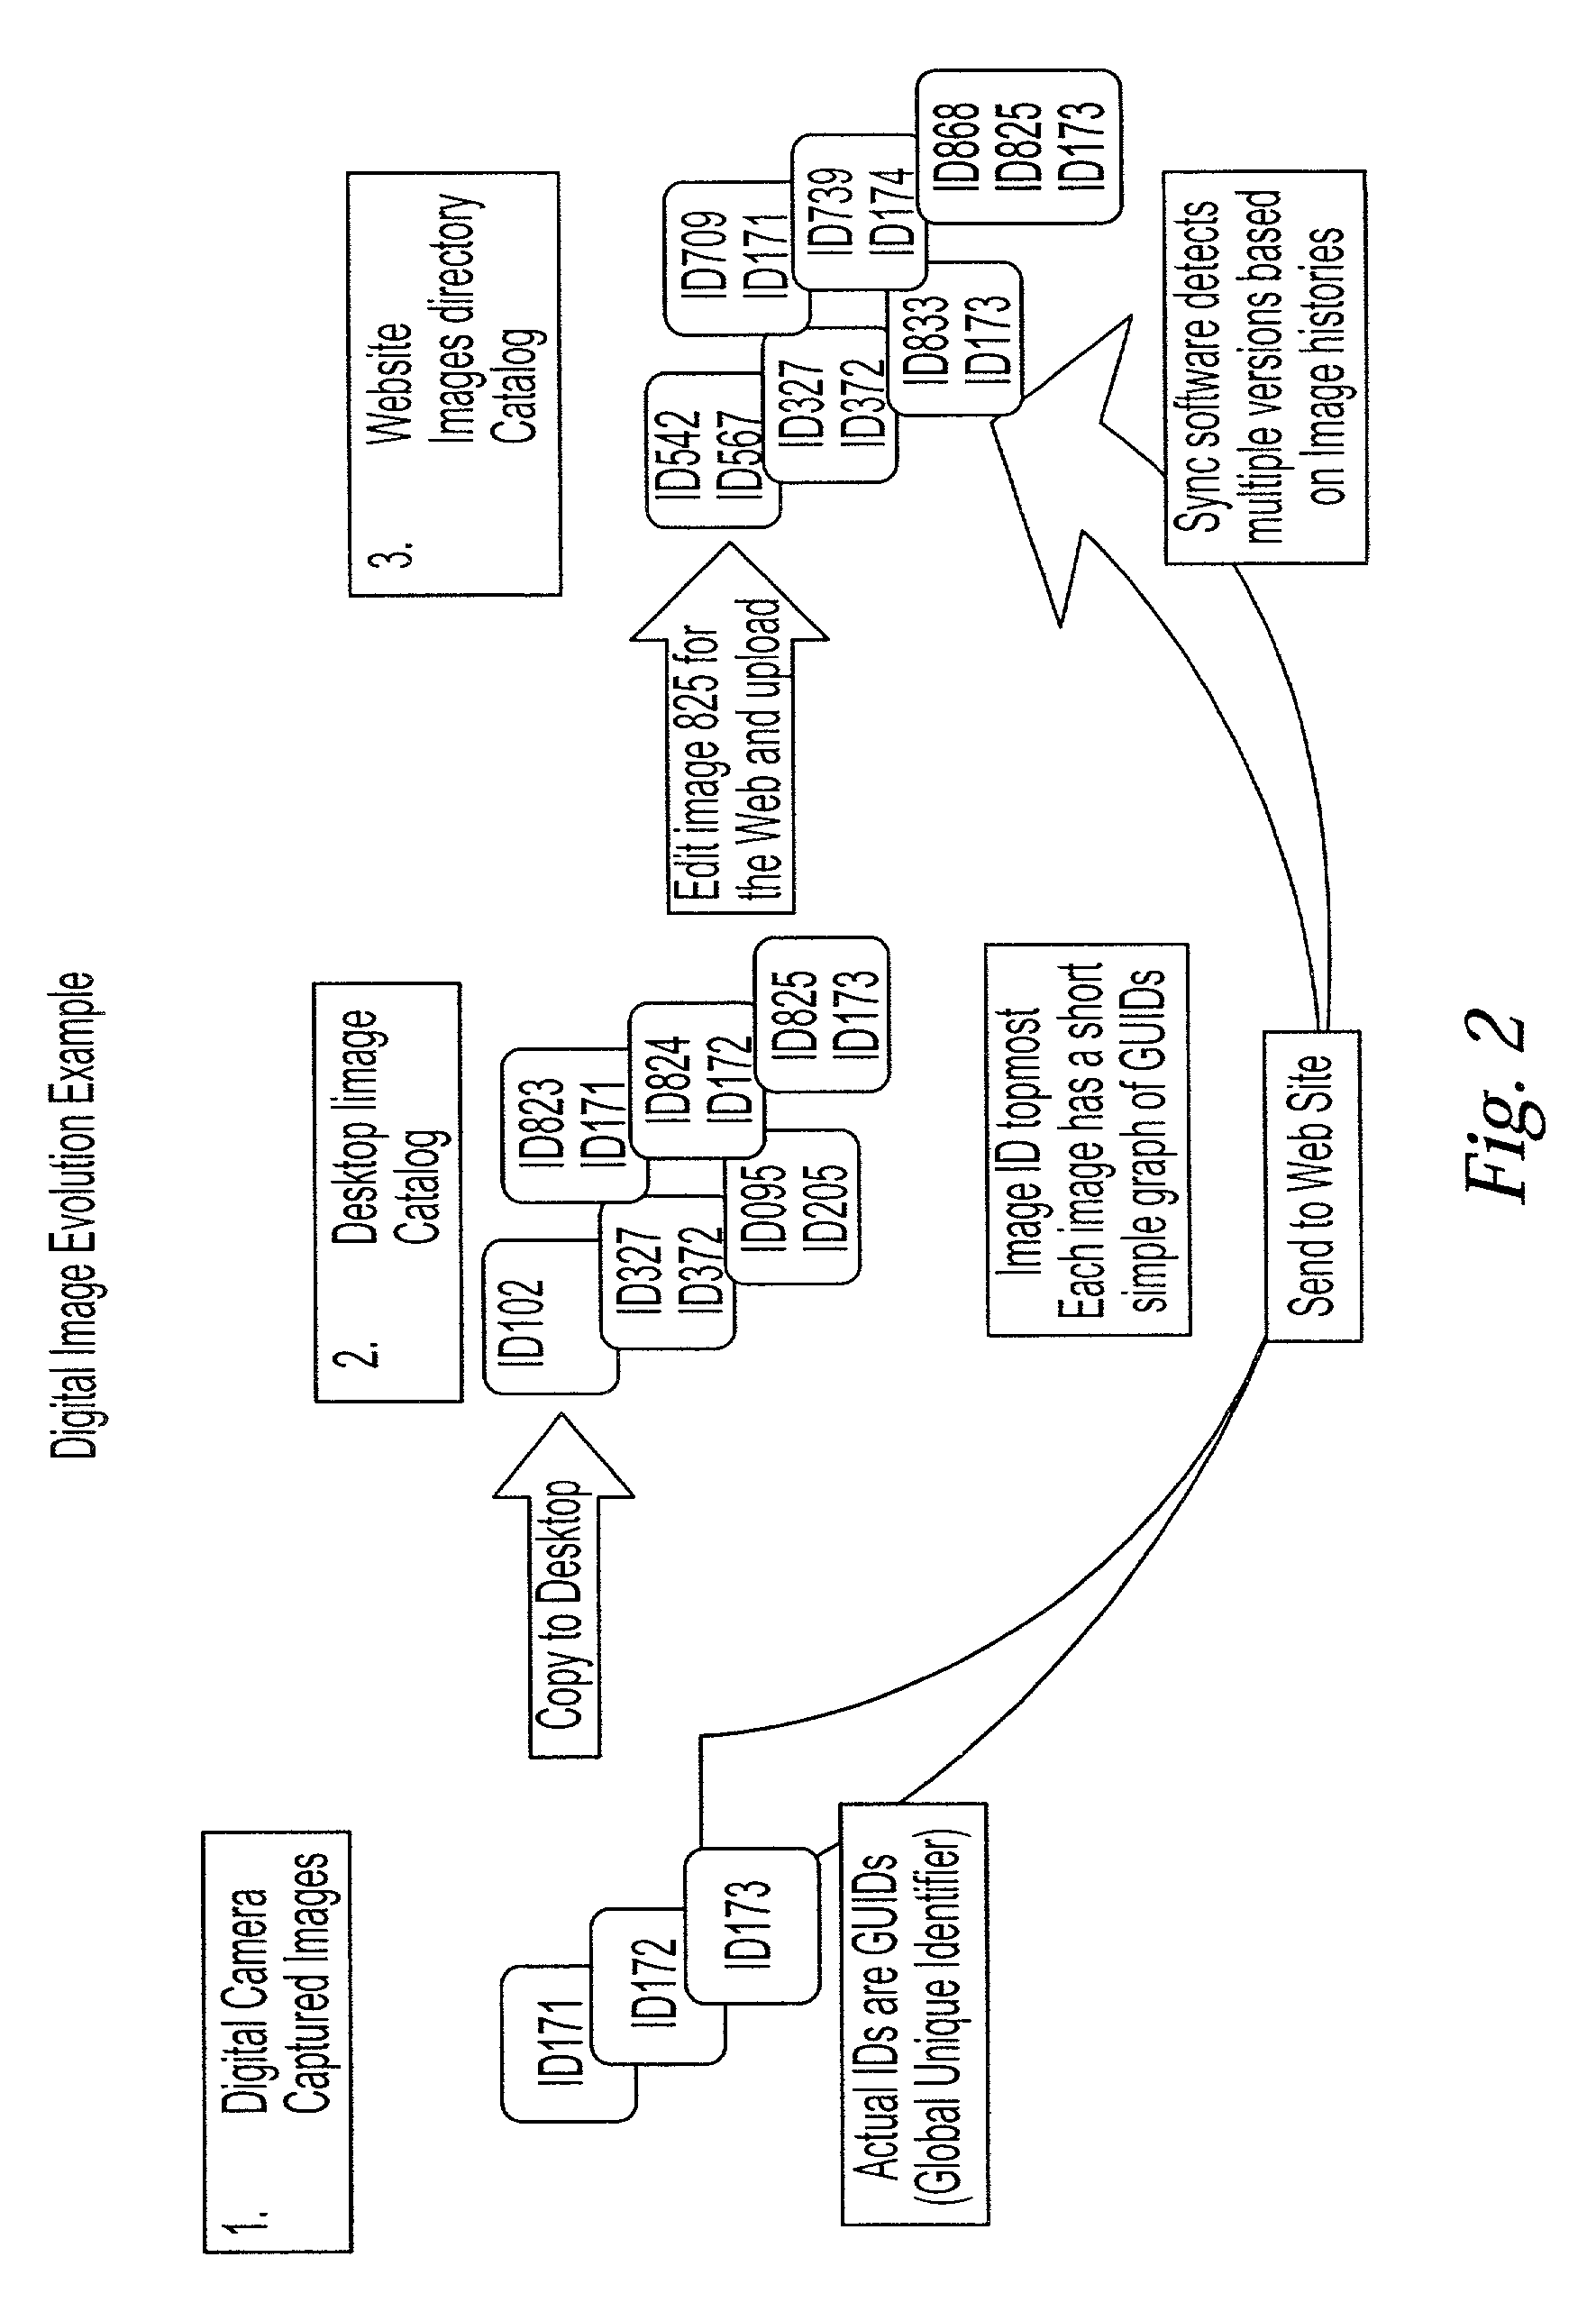 Method and apparatus for synchronizing multiple versions of digital data